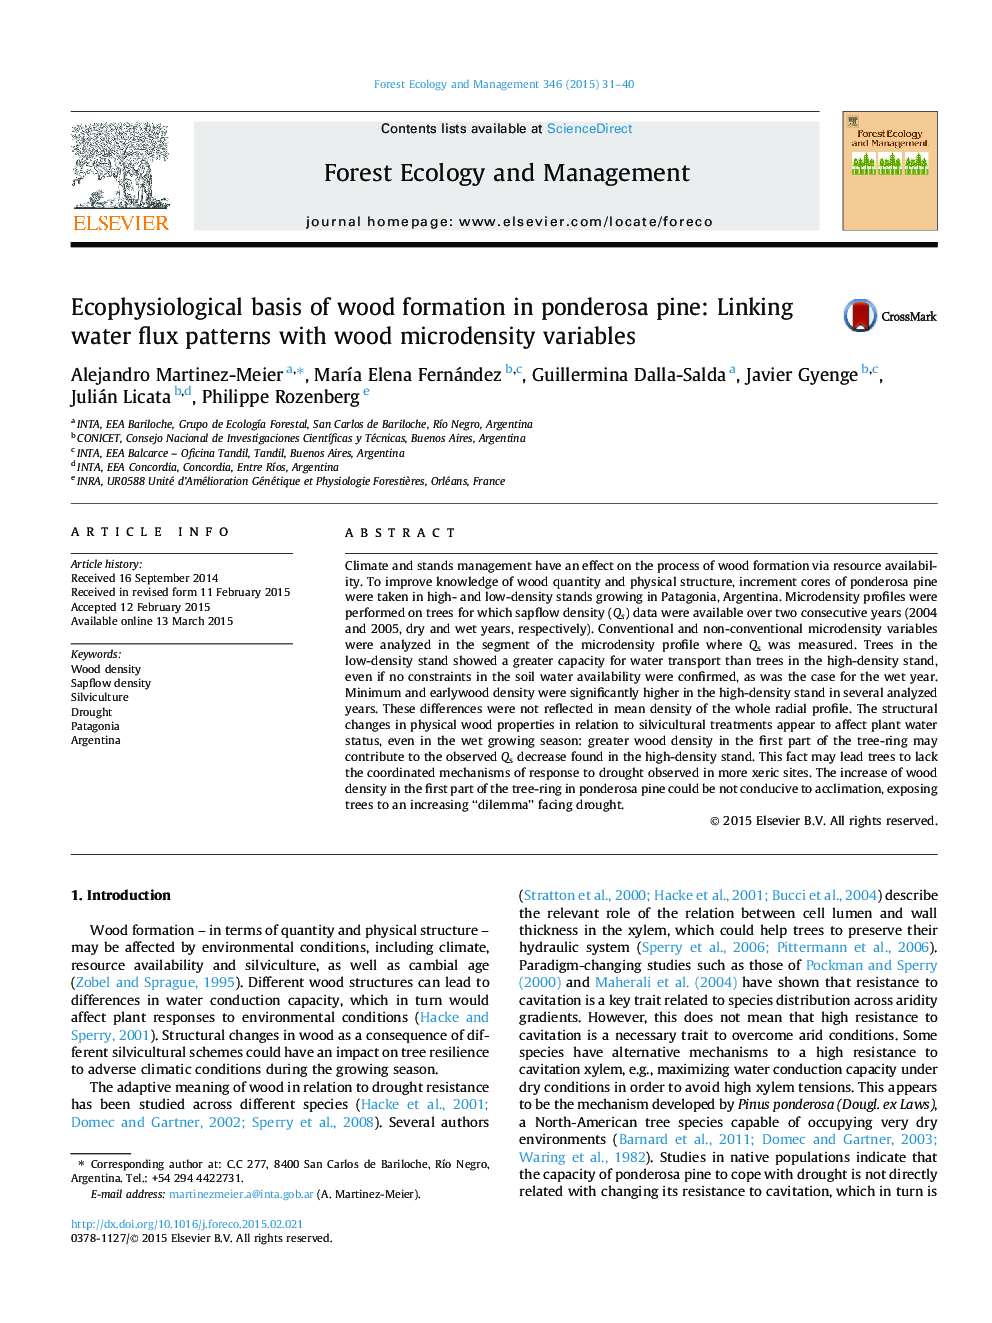 Ecophysiological basis of wood formation in ponderosa pine: Linking water flux patterns with wood microdensity variables